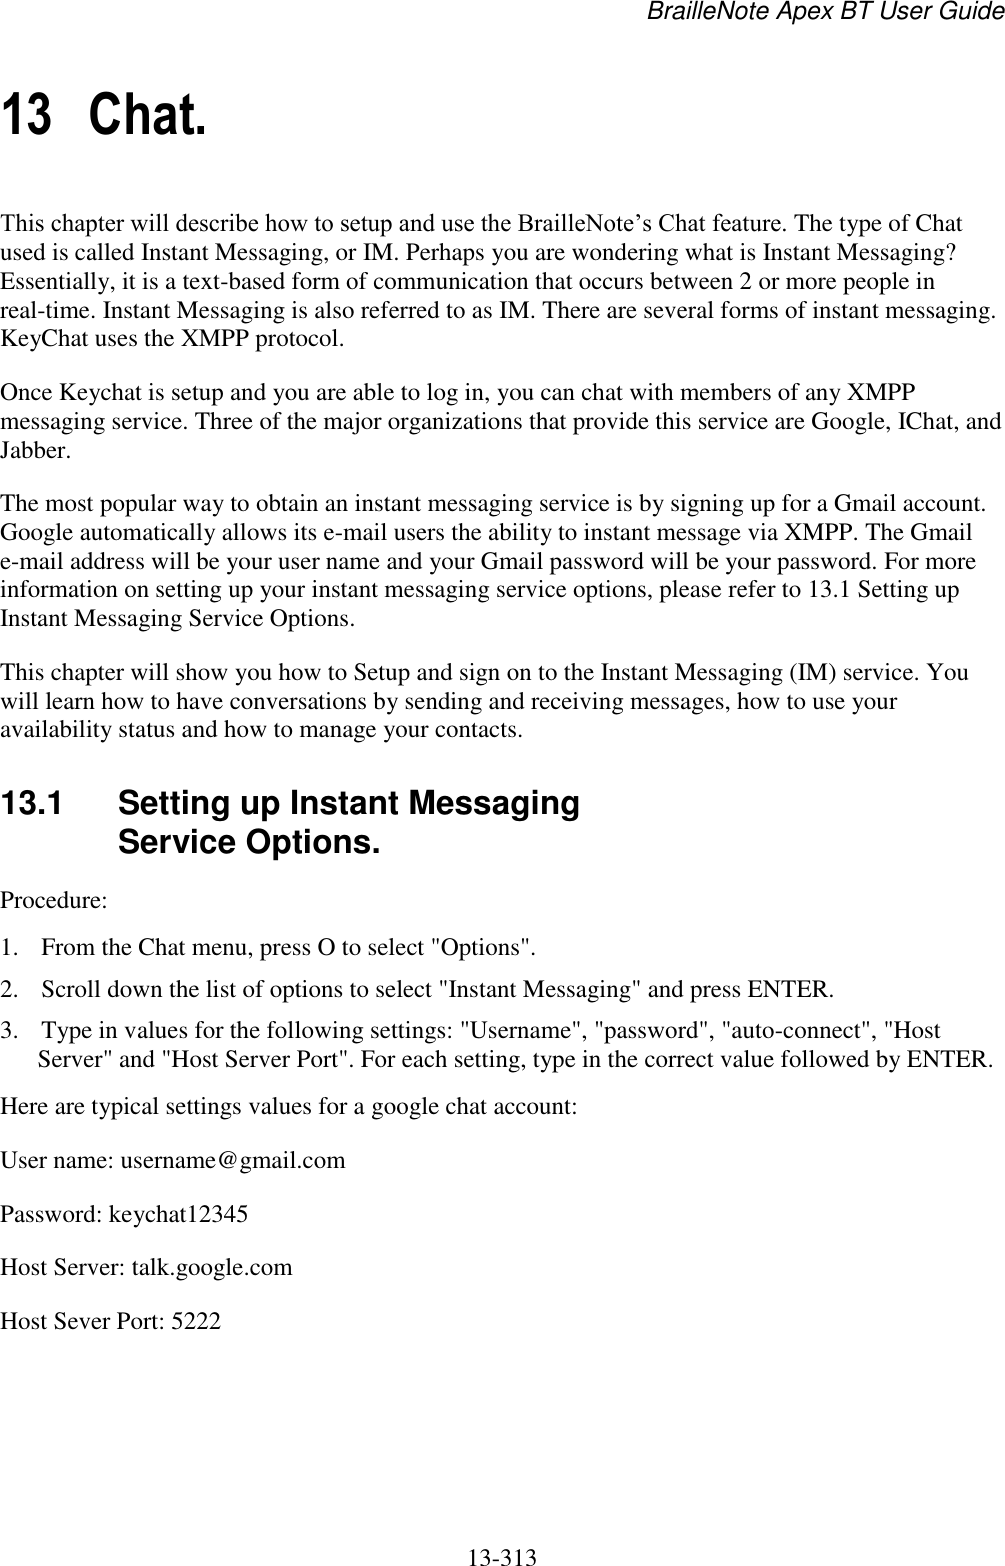 BrailleNote Apex BT User Guide   13-313   13 Chat. This chapter will describe how to setup and use the BrailleNote‟s Chat feature. The type of Chat used is called Instant Messaging, or IM. Perhaps you are wondering what is Instant Messaging? Essentially, it is a text-based form of communication that occurs between 2 or more people in real-time. Instant Messaging is also referred to as IM. There are several forms of instant messaging. KeyChat uses the XMPP protocol.  Once Keychat is setup and you are able to log in, you can chat with members of any XMPP messaging service. Three of the major organizations that provide this service are Google, IChat, and Jabber. The most popular way to obtain an instant messaging service is by signing up for a Gmail account. Google automatically allows its e-mail users the ability to instant message via XMPP. The Gmail e-mail address will be your user name and your Gmail password will be your password. For more information on setting up your instant messaging service options, please refer to 13.1 Setting up Instant Messaging Service Options. This chapter will show you how to Setup and sign on to the Instant Messaging (IM) service. You will learn how to have conversations by sending and receiving messages, how to use your availability status and how to manage your contacts.  13.1  Setting up Instant Messaging Service Options. Procedure:  1. From the Chat menu, press O to select &quot;Options&quot;.  2. Scroll down the list of options to select &quot;Instant Messaging&quot; and press ENTER. 3. Type in values for the following settings: &quot;Username&quot;, &quot;password&quot;, &quot;auto-connect&quot;, &quot;Host Server&quot; and &quot;Host Server Port&quot;. For each setting, type in the correct value followed by ENTER. Here are typical settings values for a google chat account:  User name: username@gmail.com Password: keychat12345 Host Server: talk.google.com Host Sever Port: 5222  